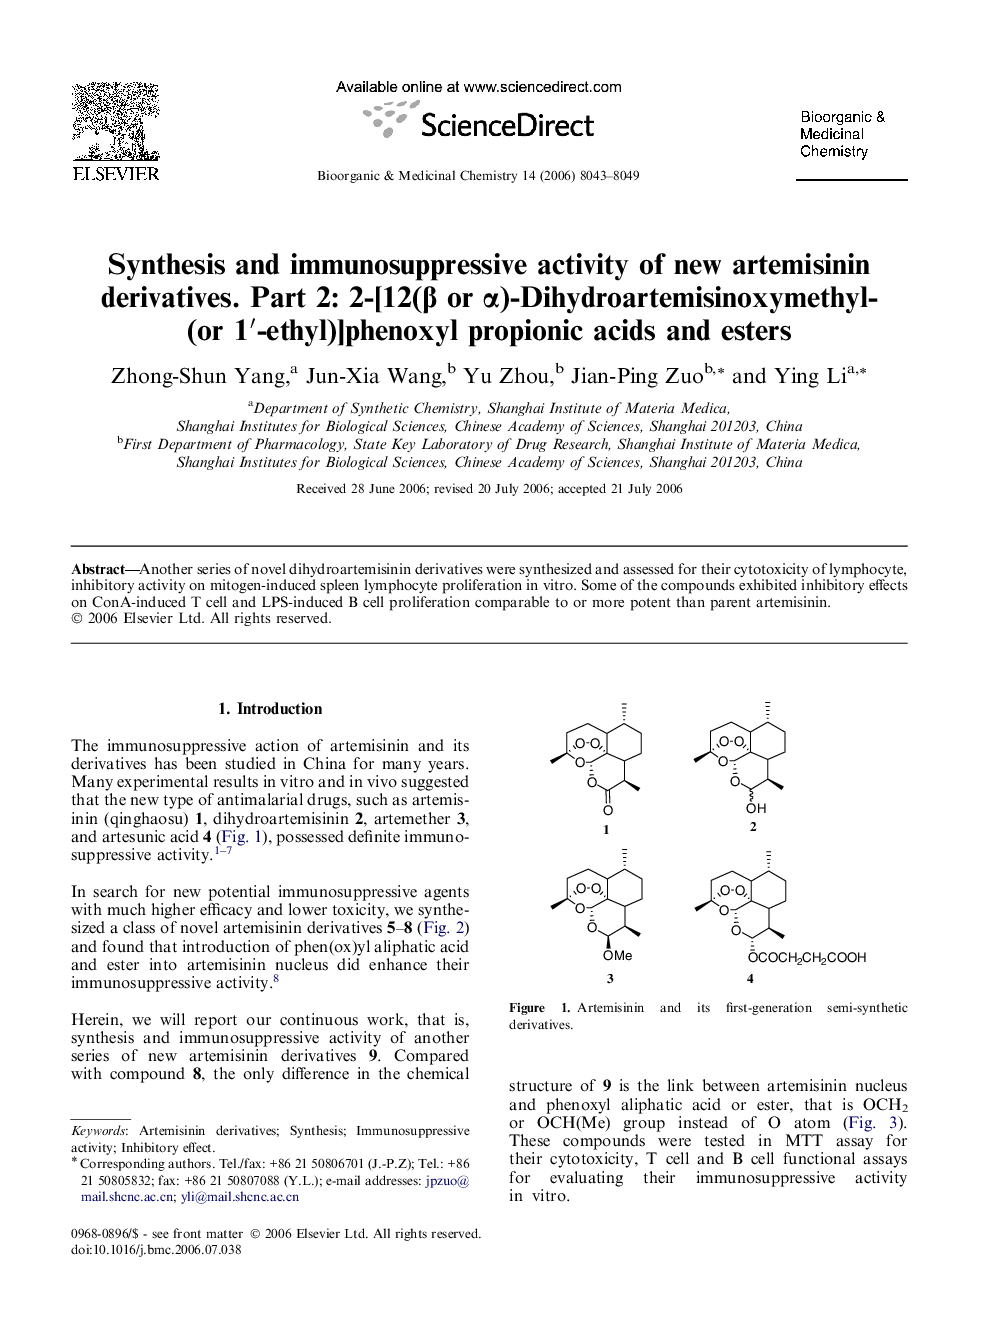 Synthesis and immunosuppressive activity of new artemisinin derivatives. Part 2: 2-[12(β or α)-Dihydroartemisinoxymethyl(or 1′-ethyl)]phenoxyl propionic acids and esters